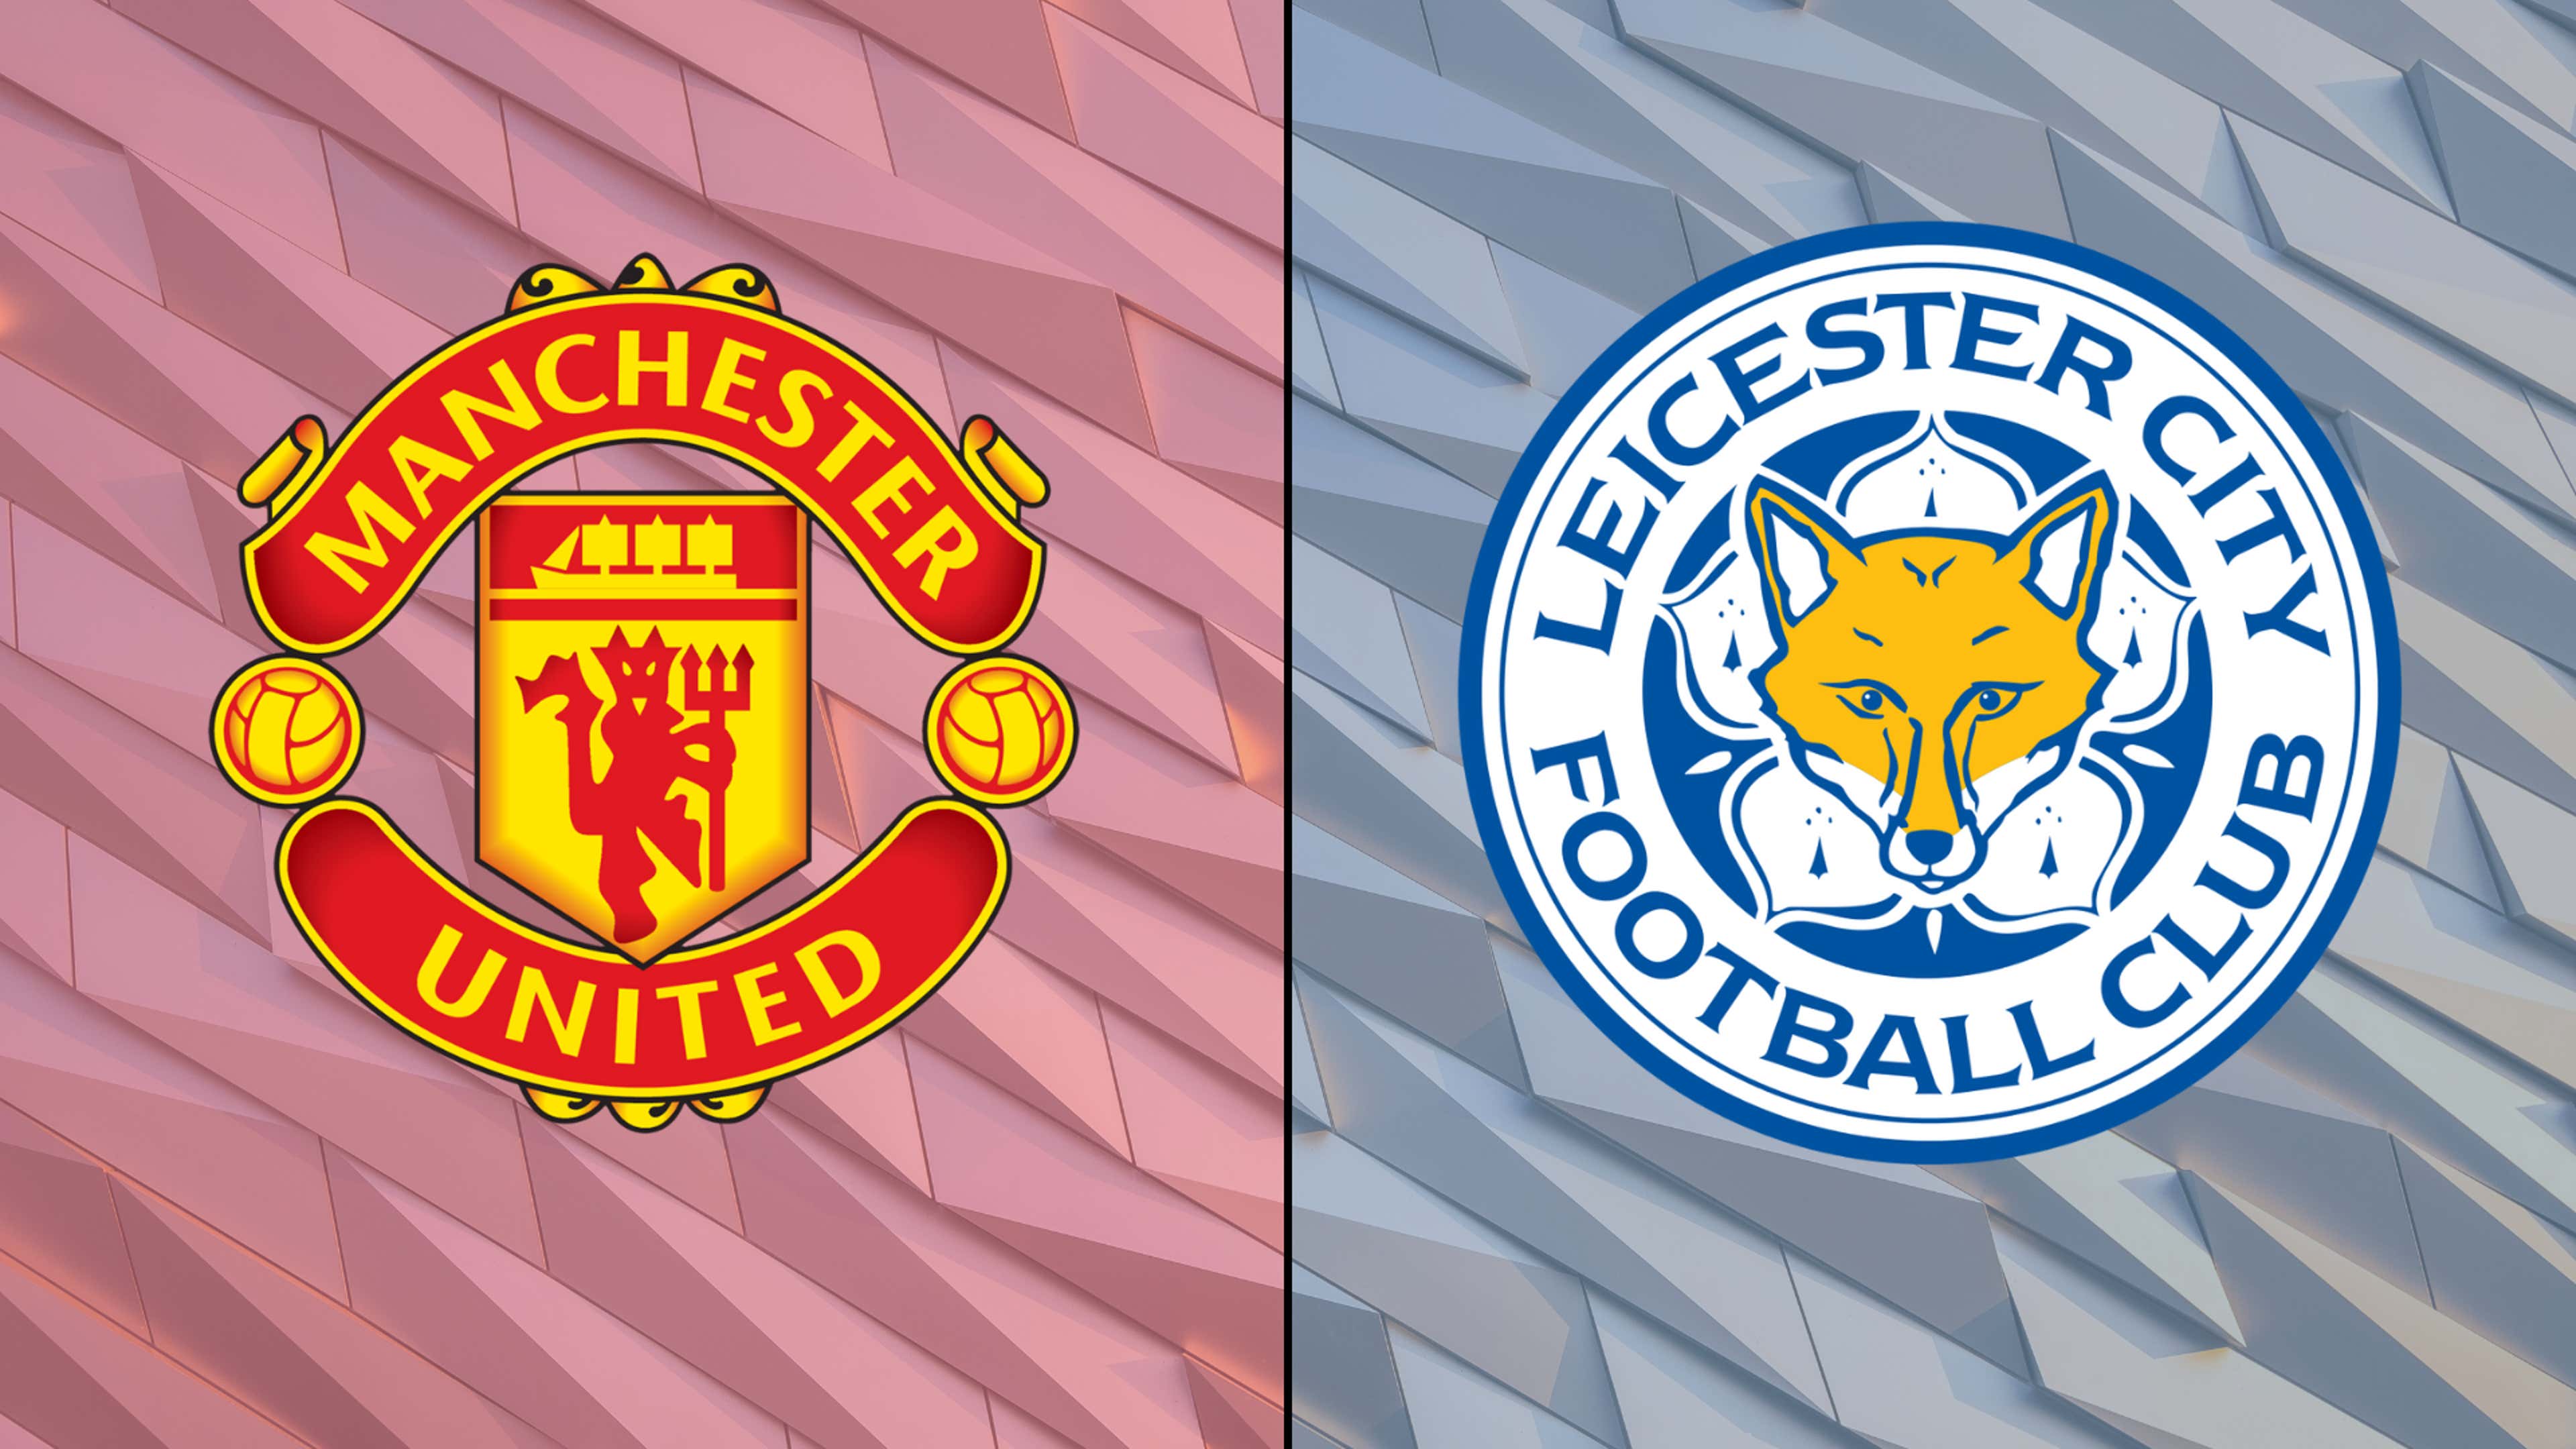 Manchester united - leicester city